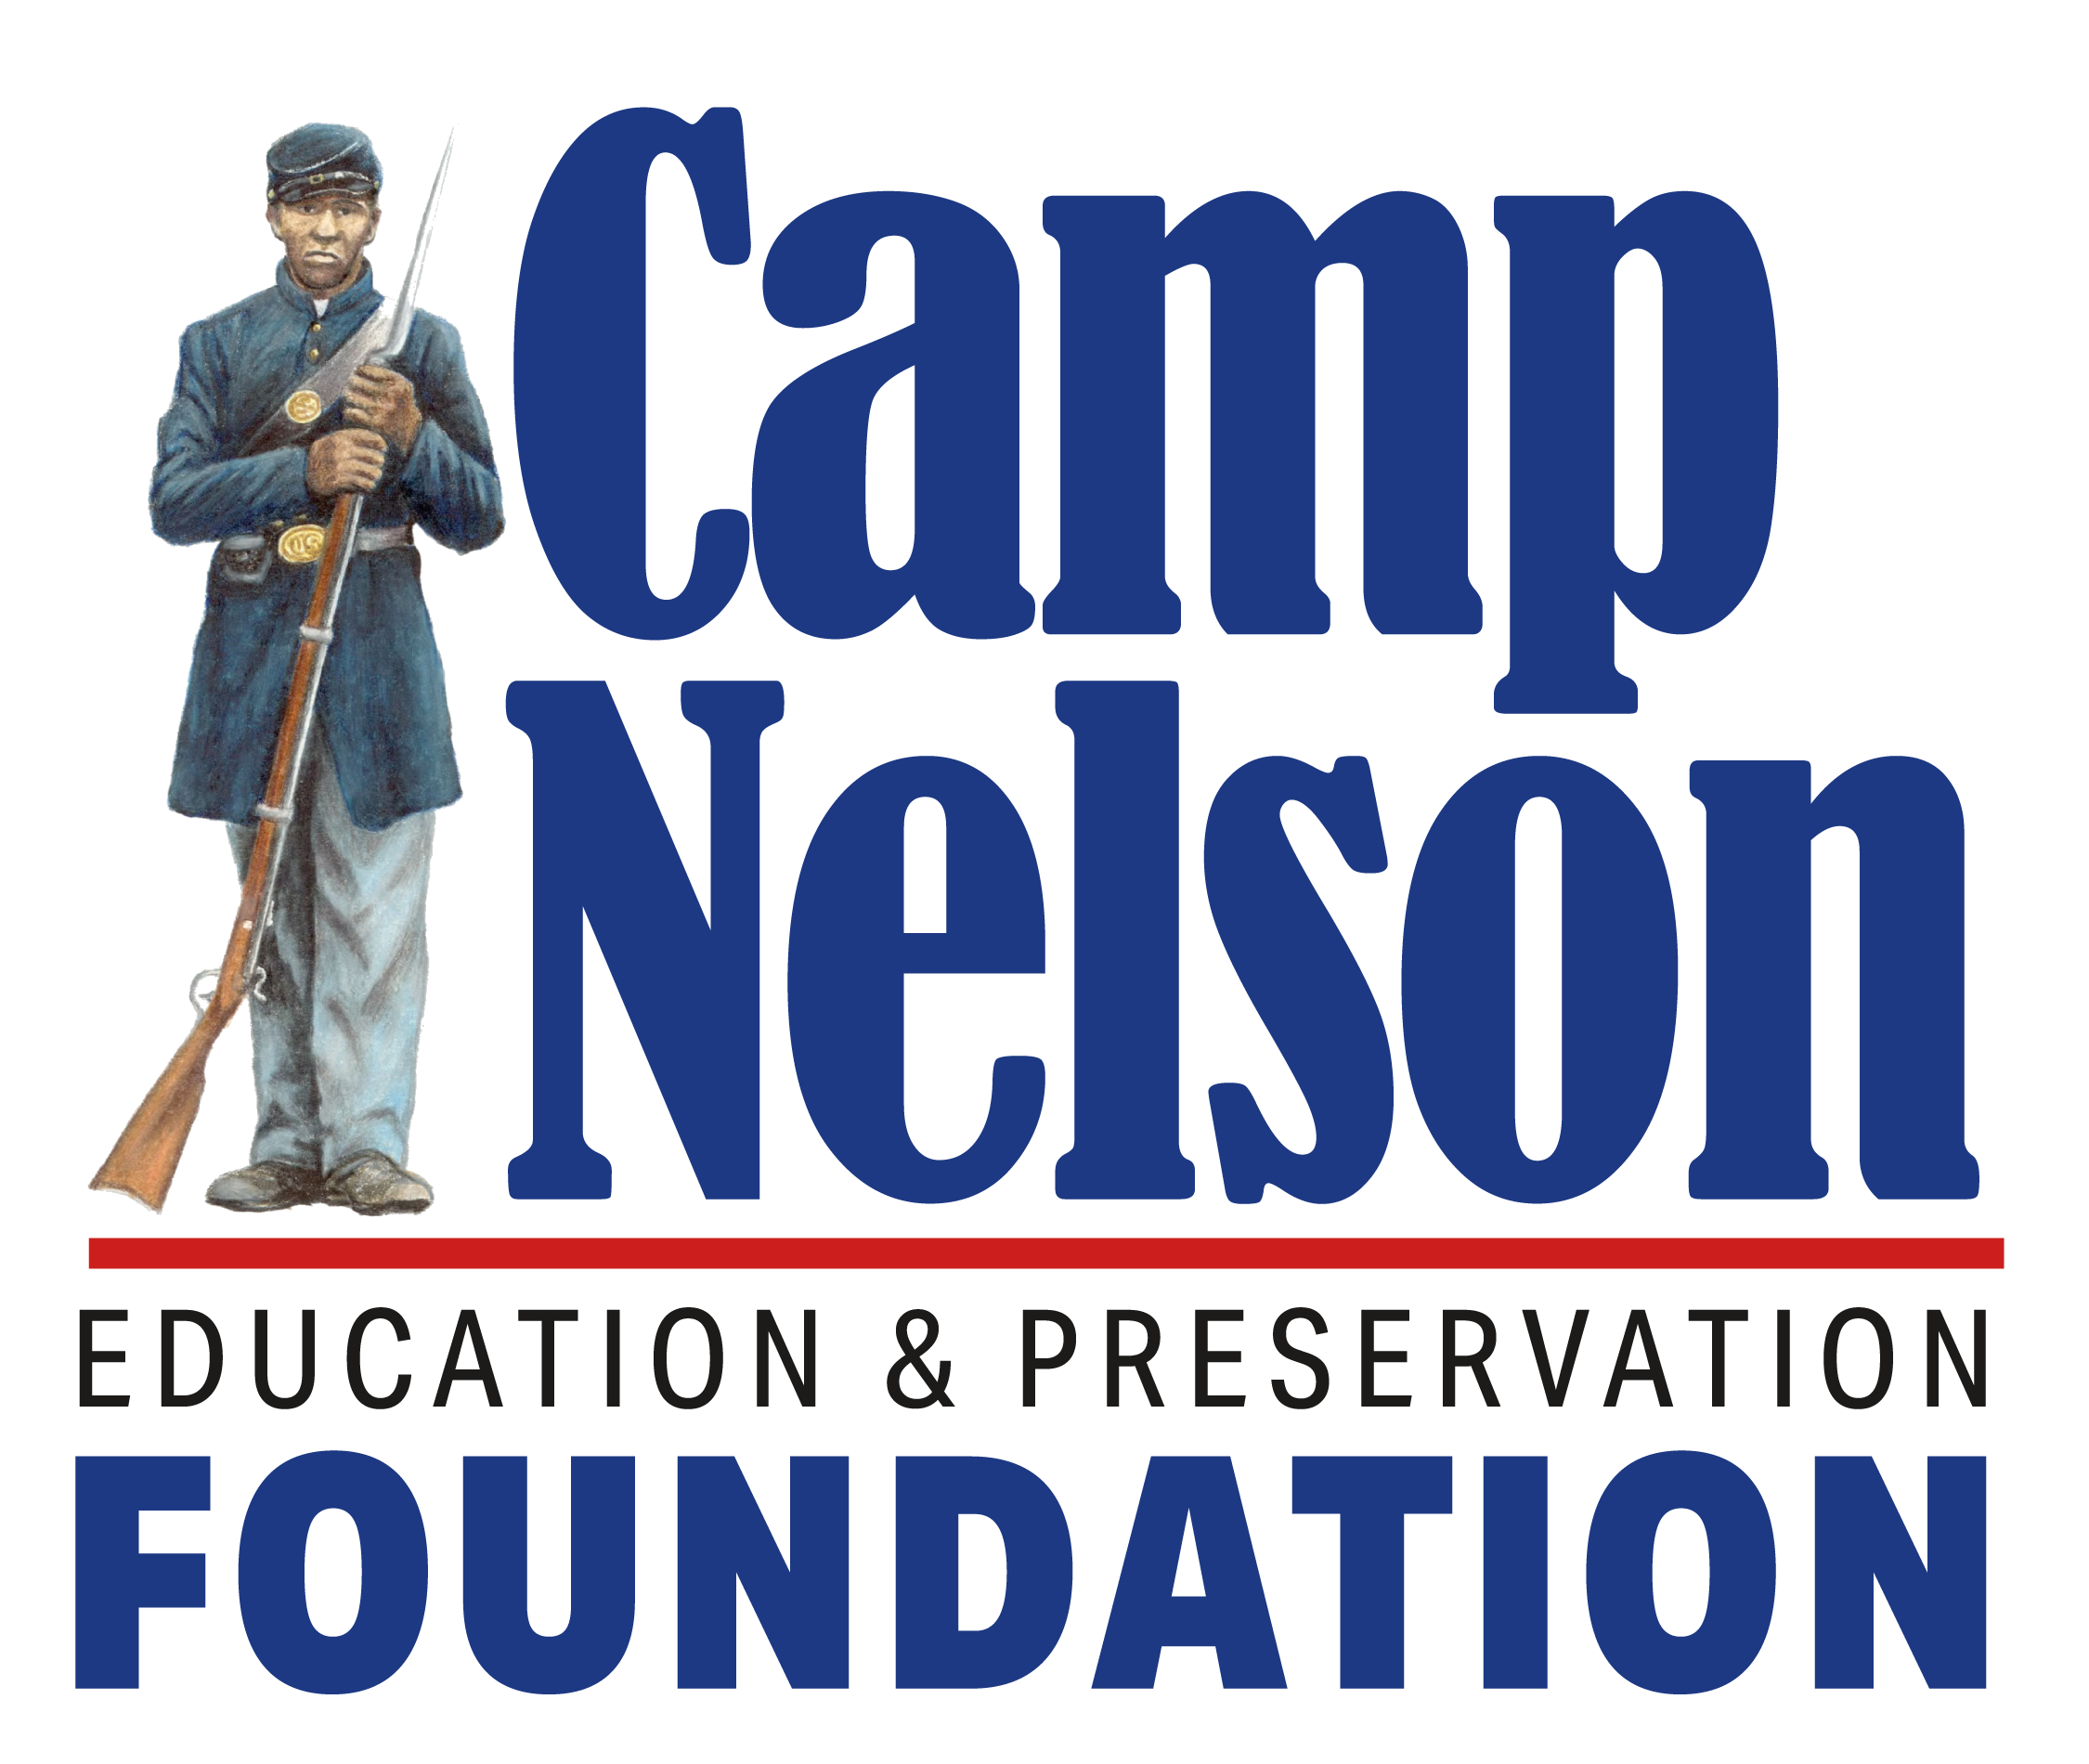 Camp Nelson Foundation